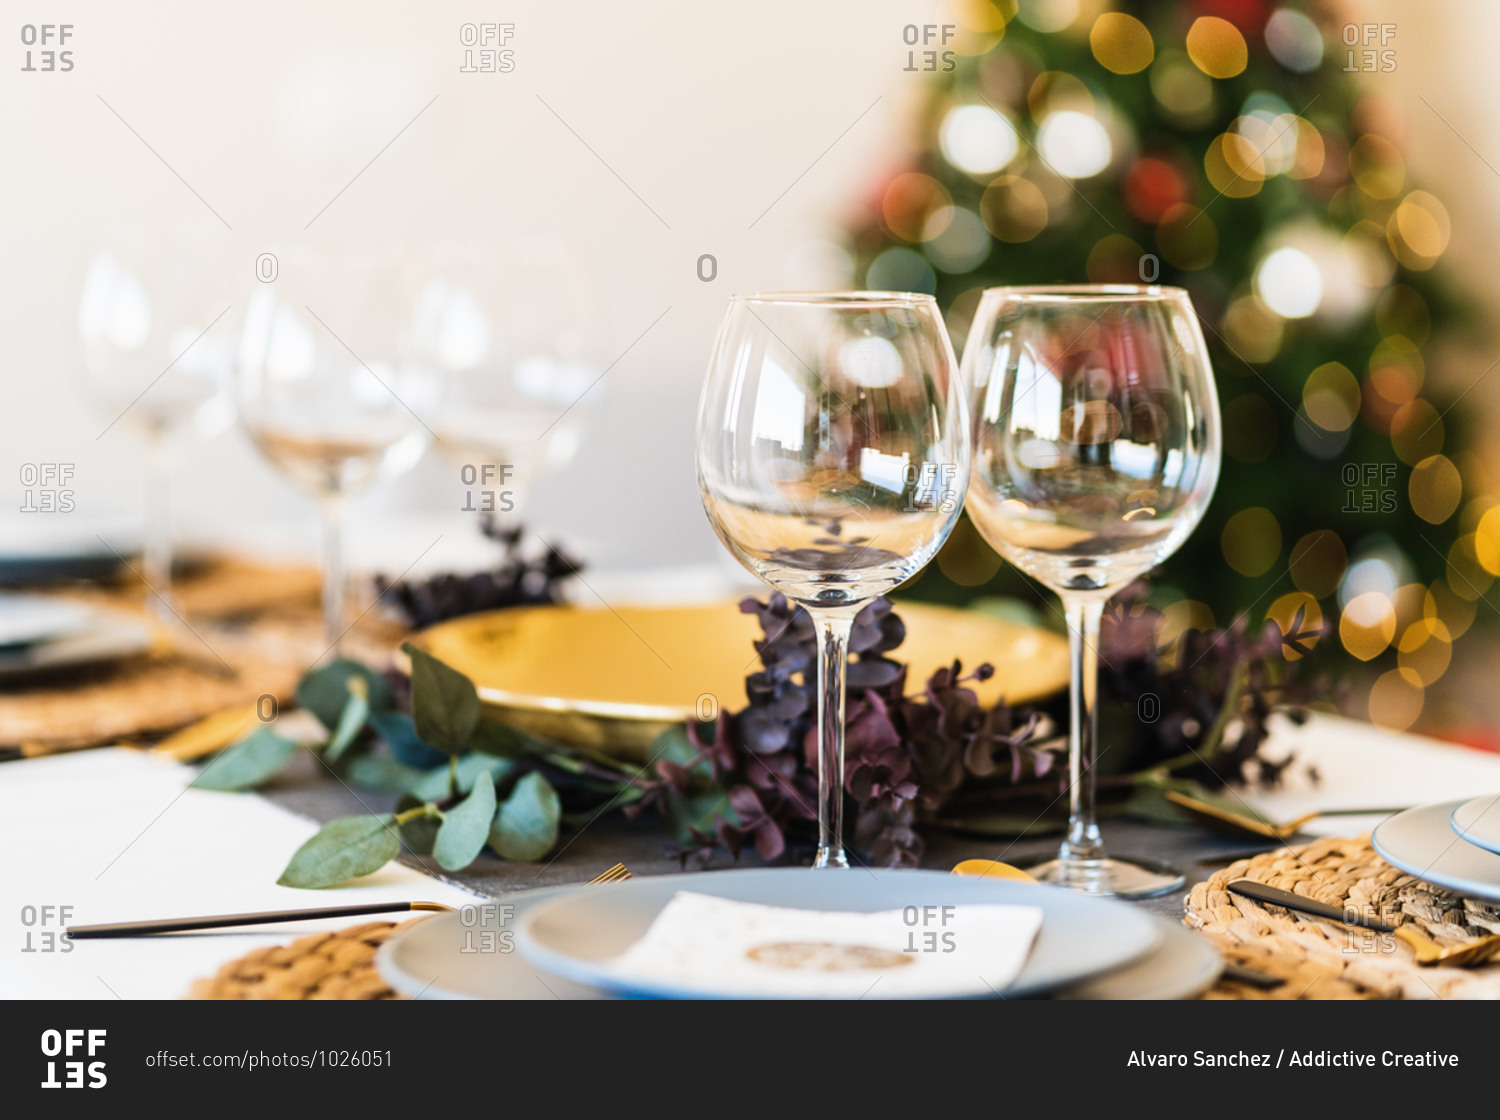 Dining table served with glasses and plates against blurred glowing Christmas tree on Christmas eve at home